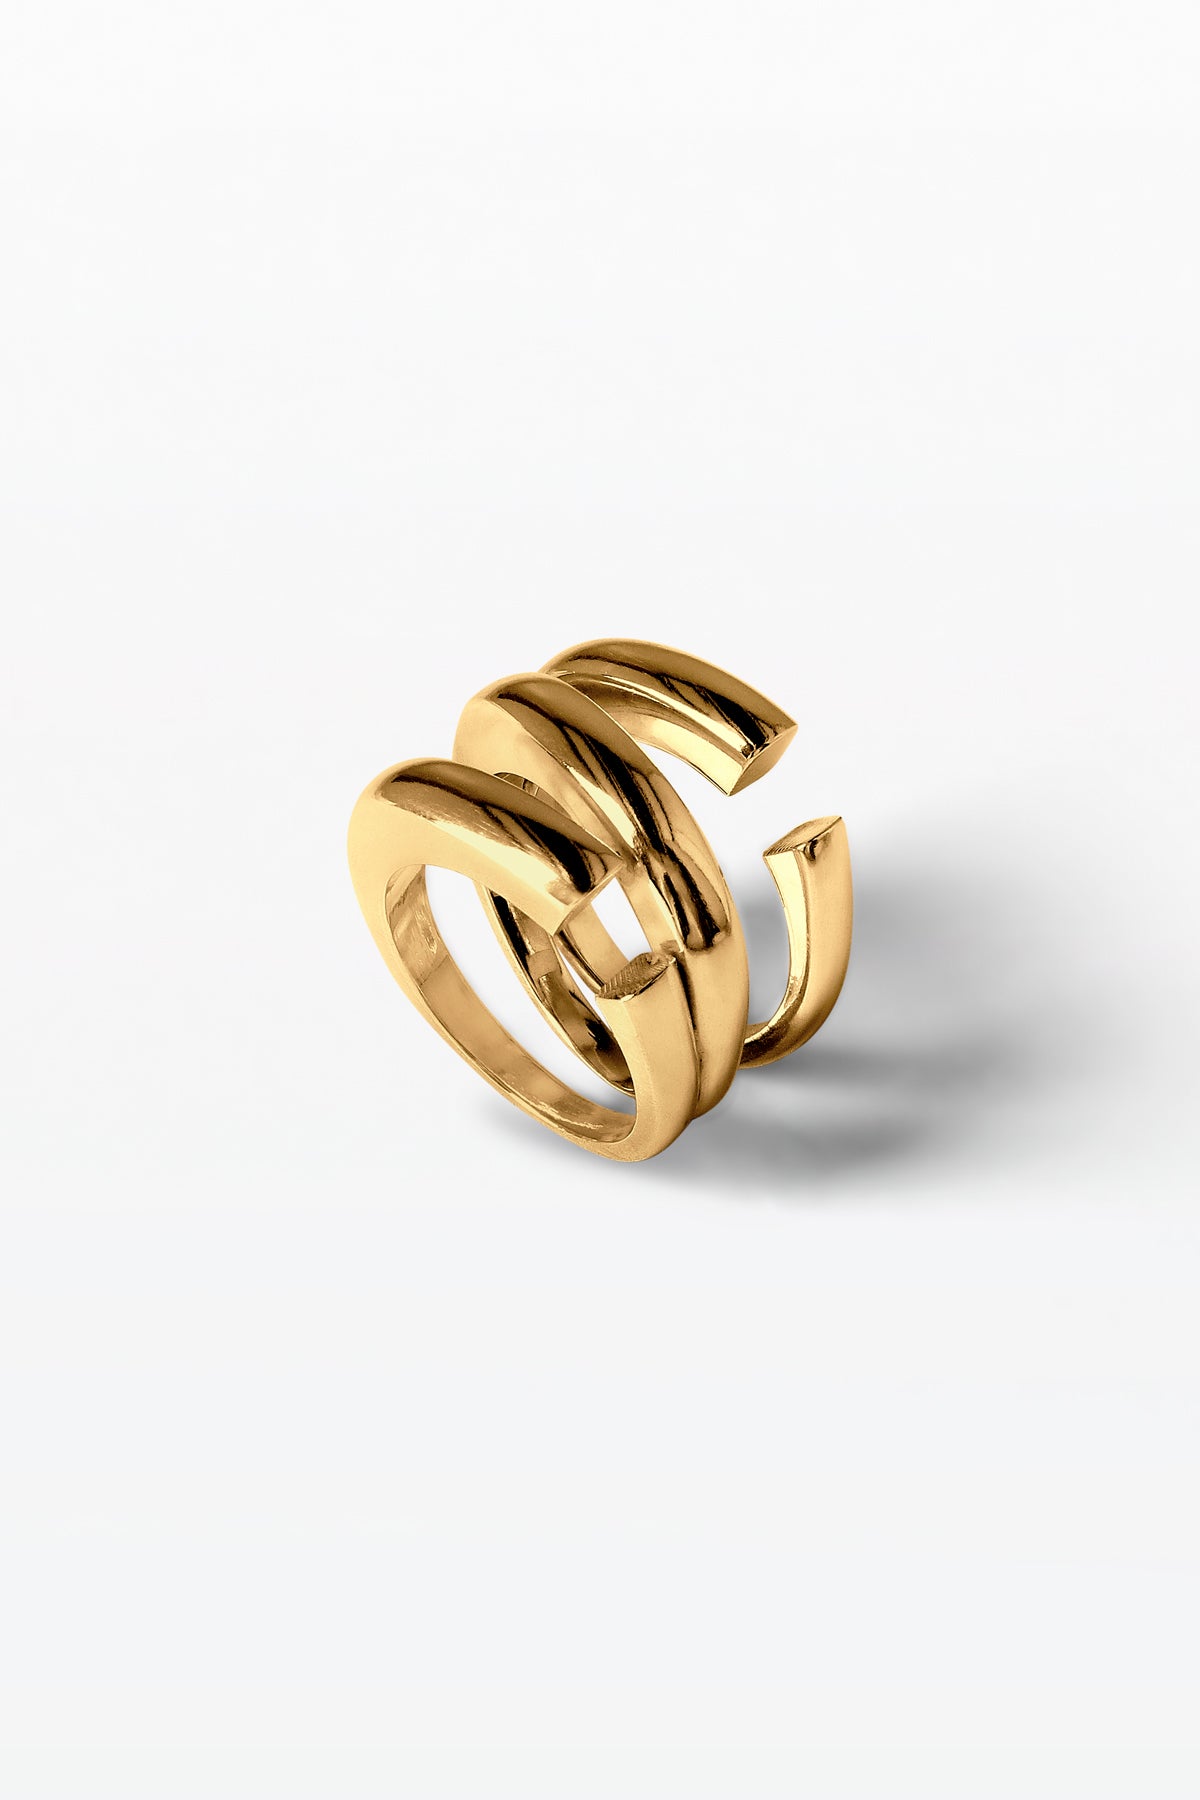 Strata Ring 05 Gold Plated Silver